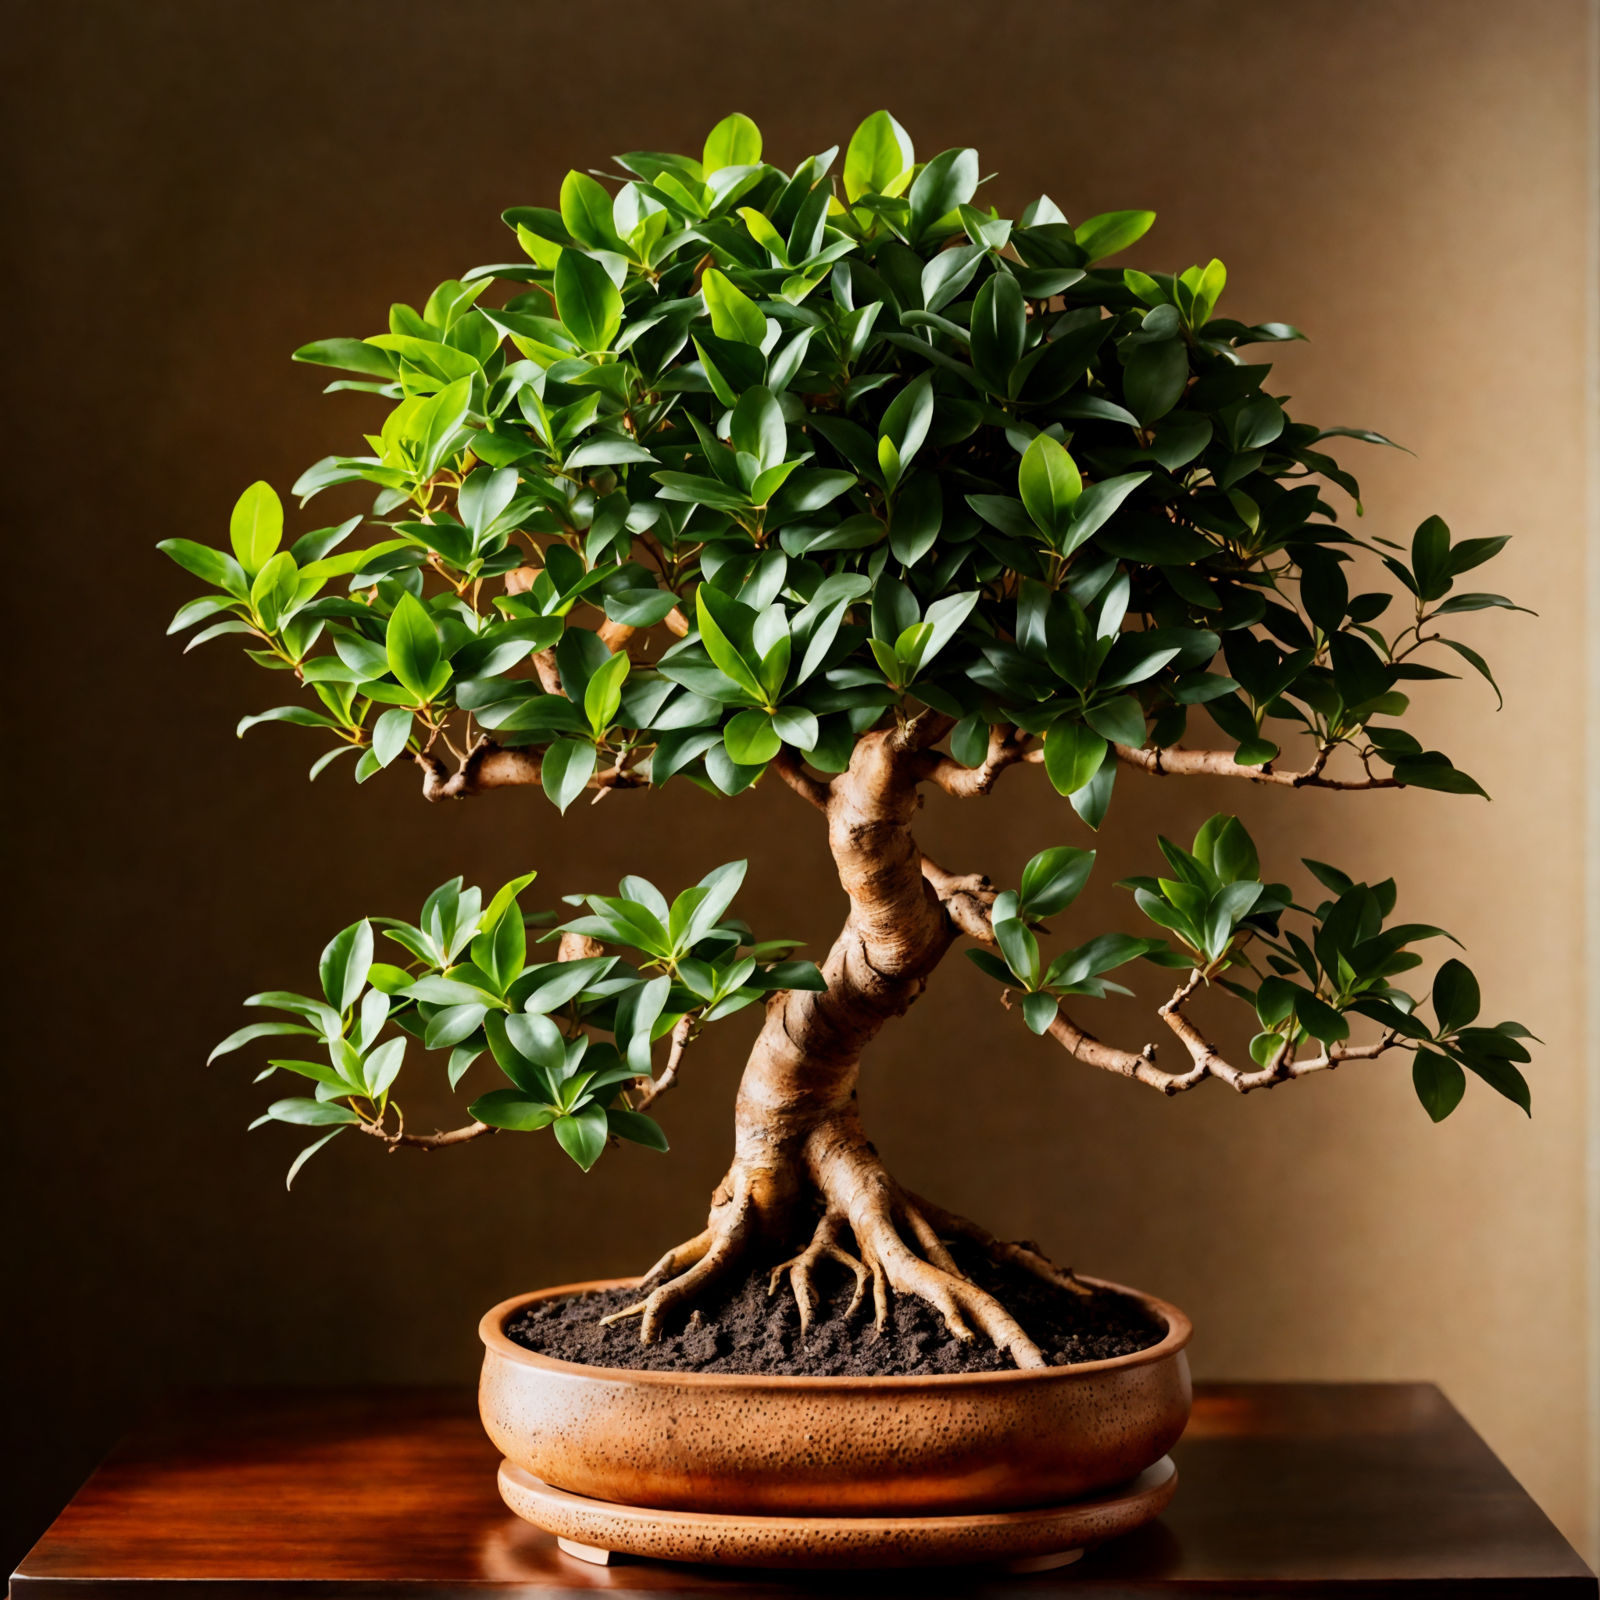 A Ficus microcarpa in a bowl on a table, with another behind it, in clear, neutral-lit indoor setting.